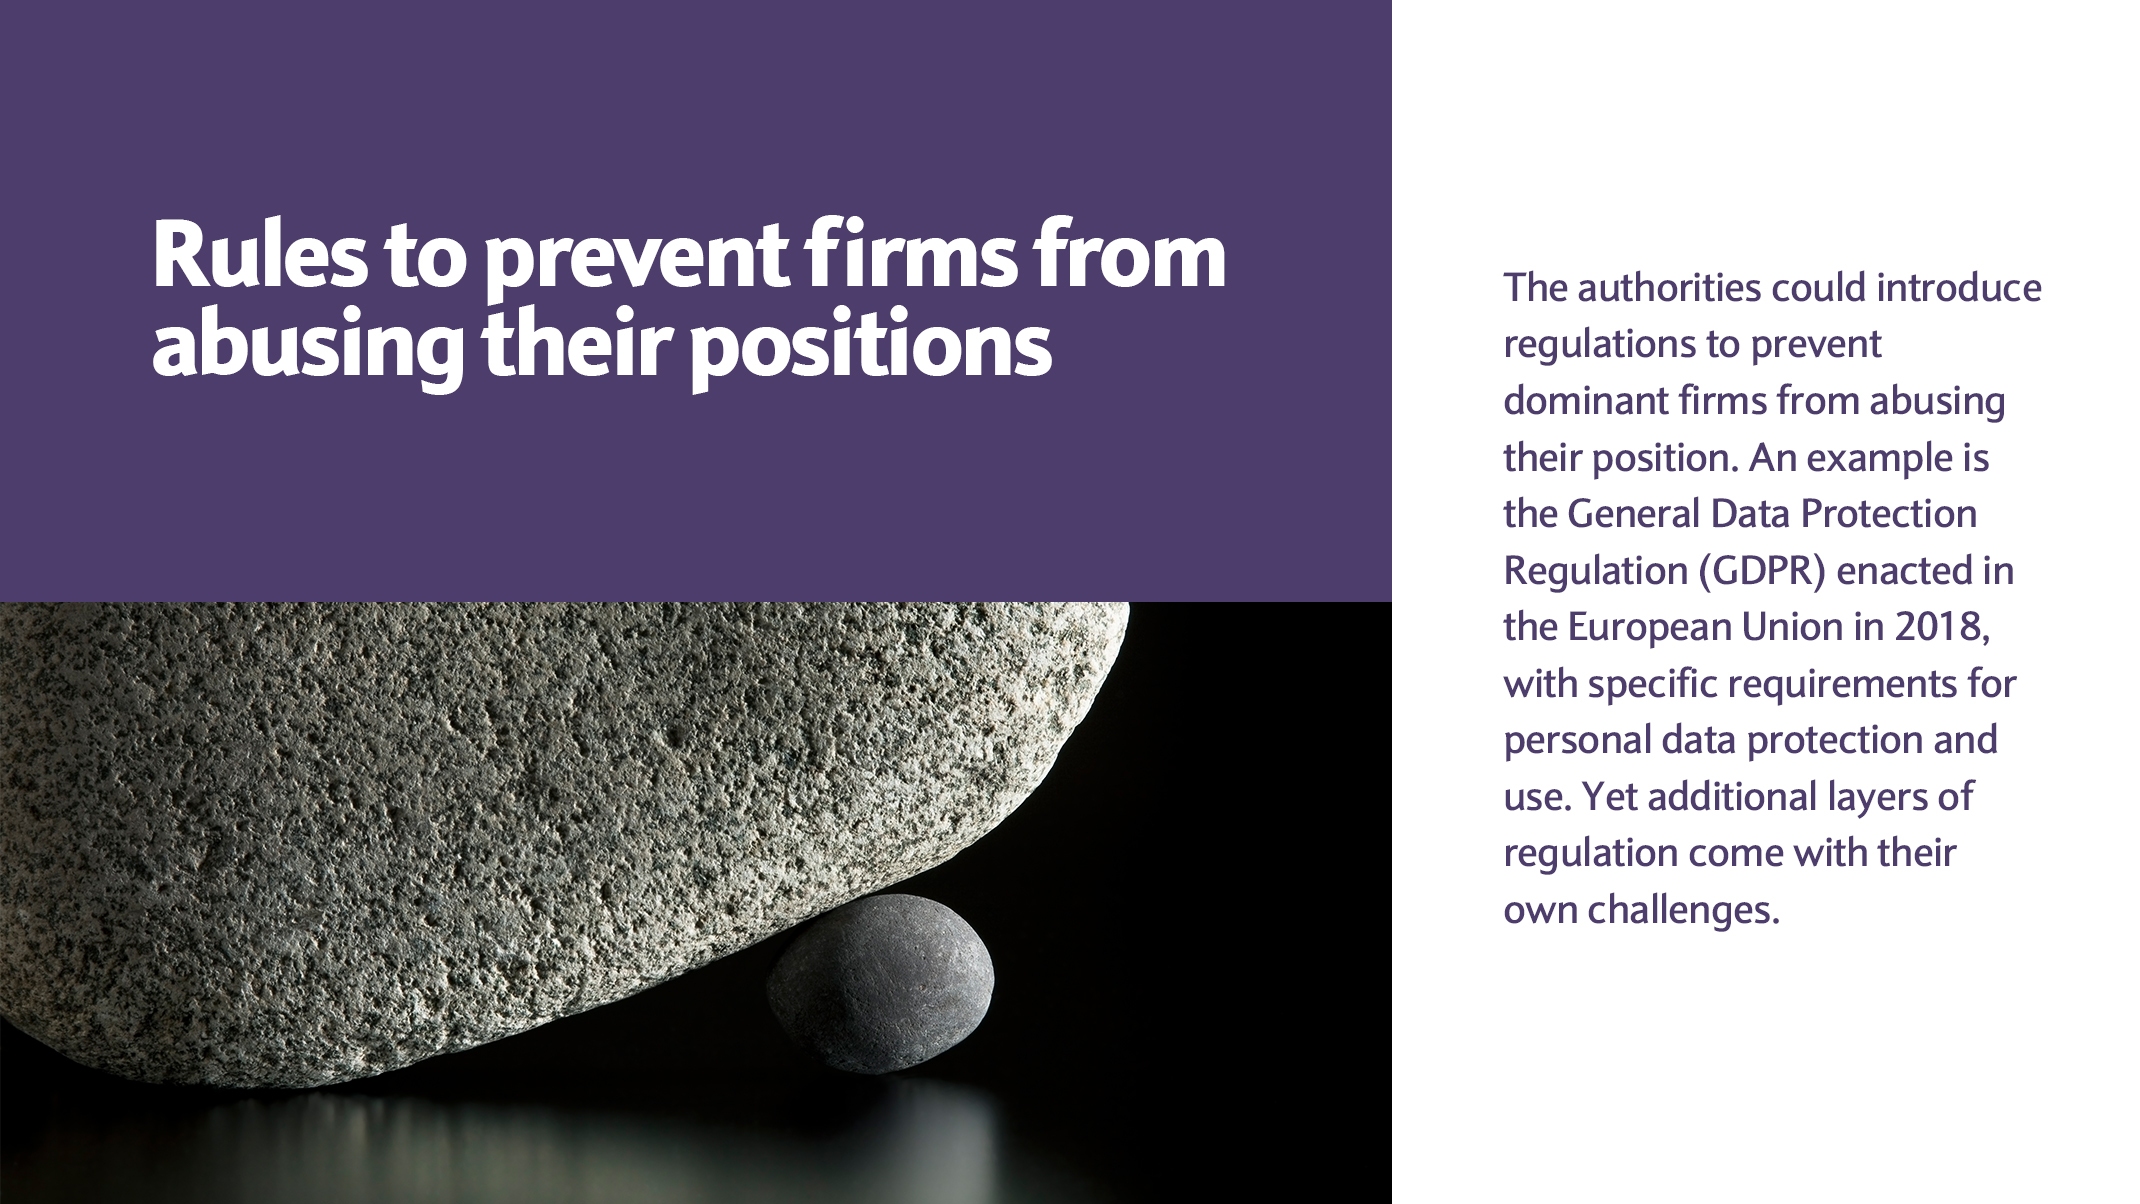 The authorities could introduce regulations to prevent dominant firms from abusing their position. An example is the General Data Protection Regulation (GDPR) enacted in the European Union in 2018, with specific requirements for personal data protection and use. Yet additional layers of regulation come with their own challenges.